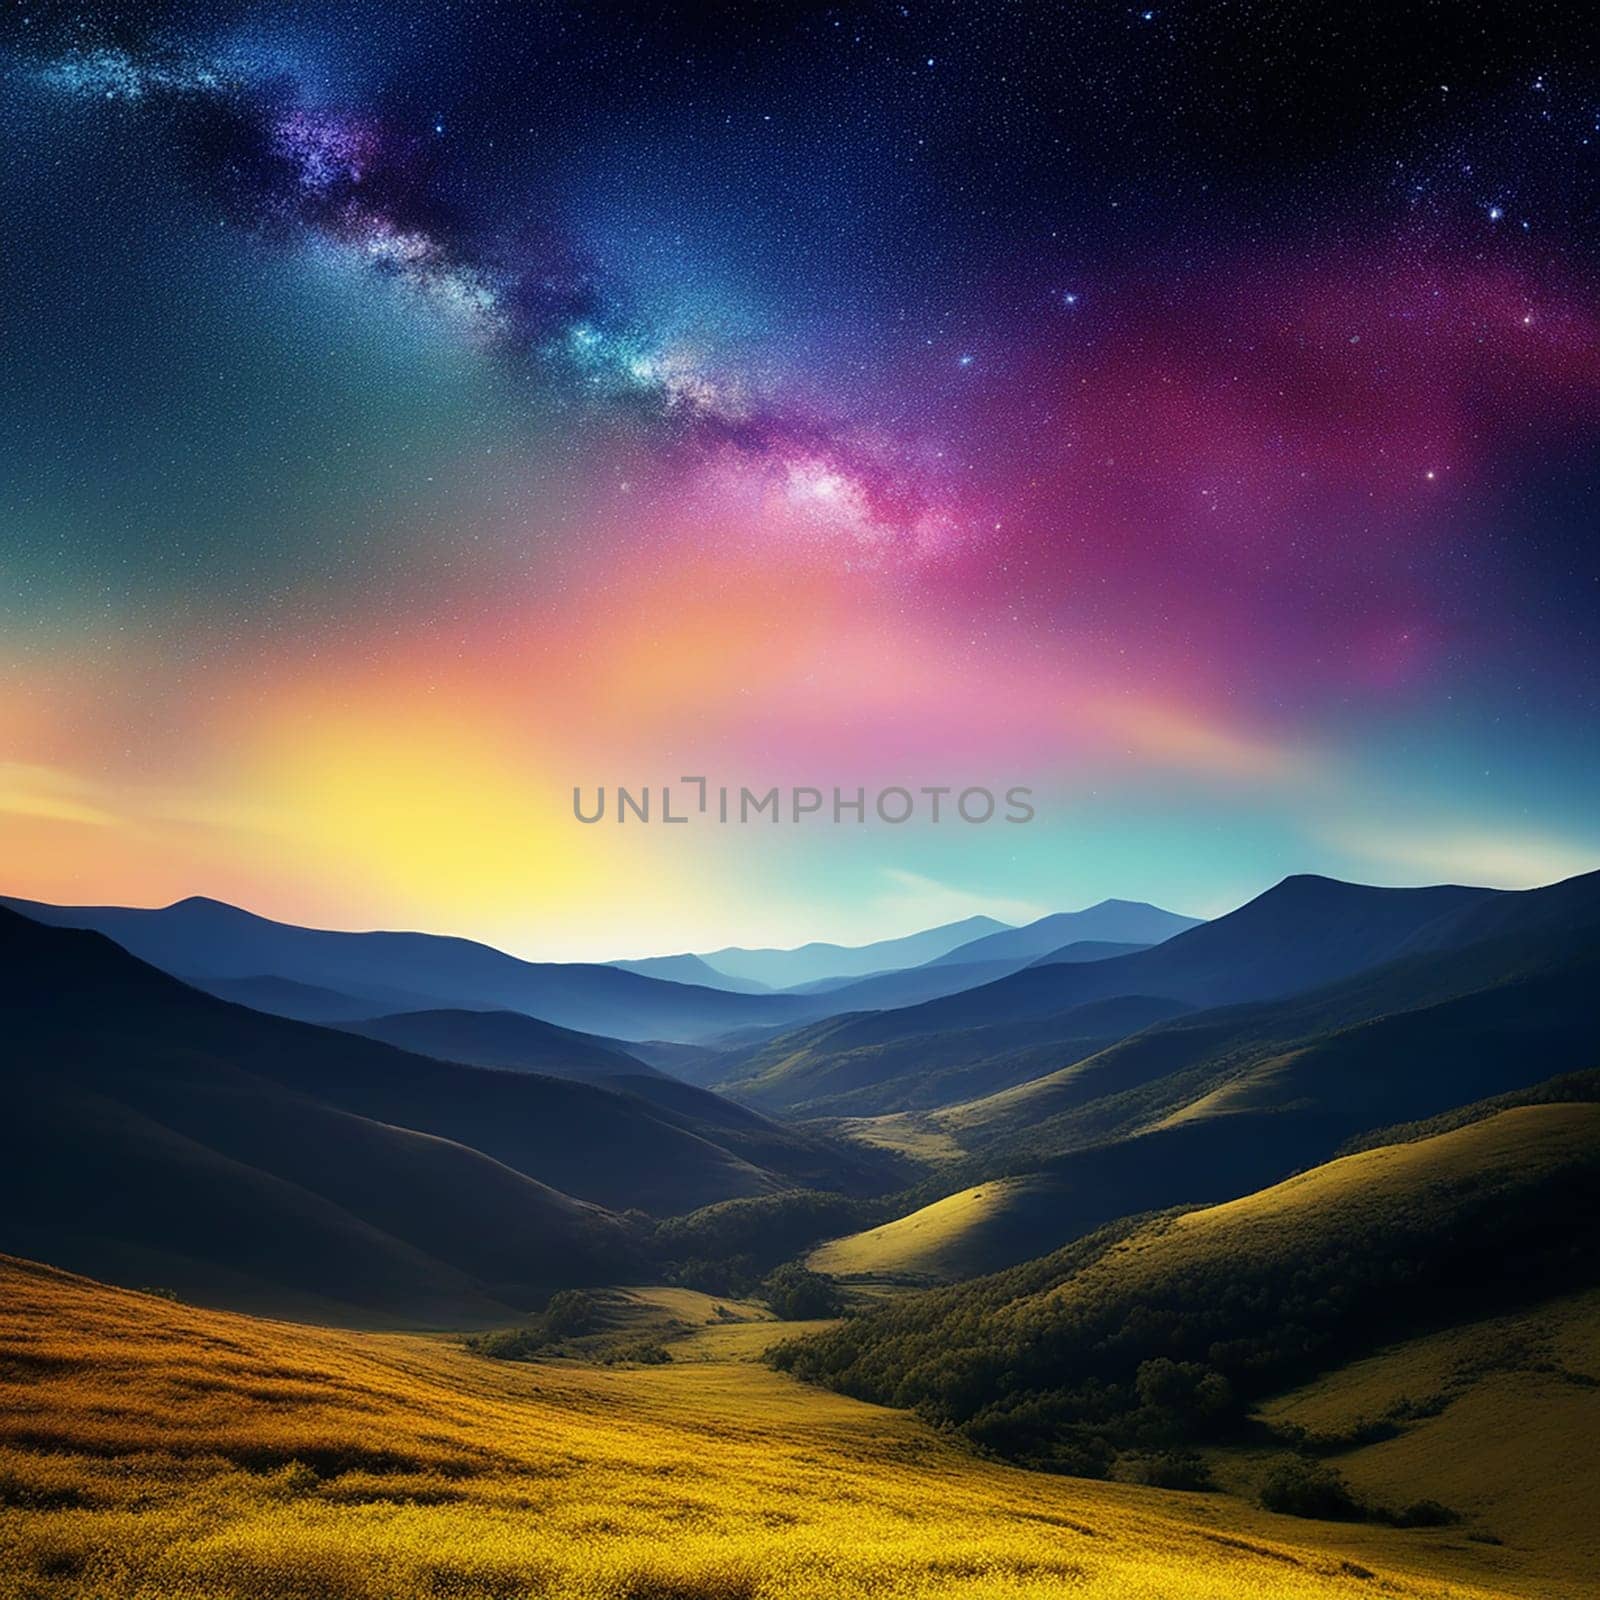 Colorful Milky Way and Illuminated Mountains in the Night Landscape